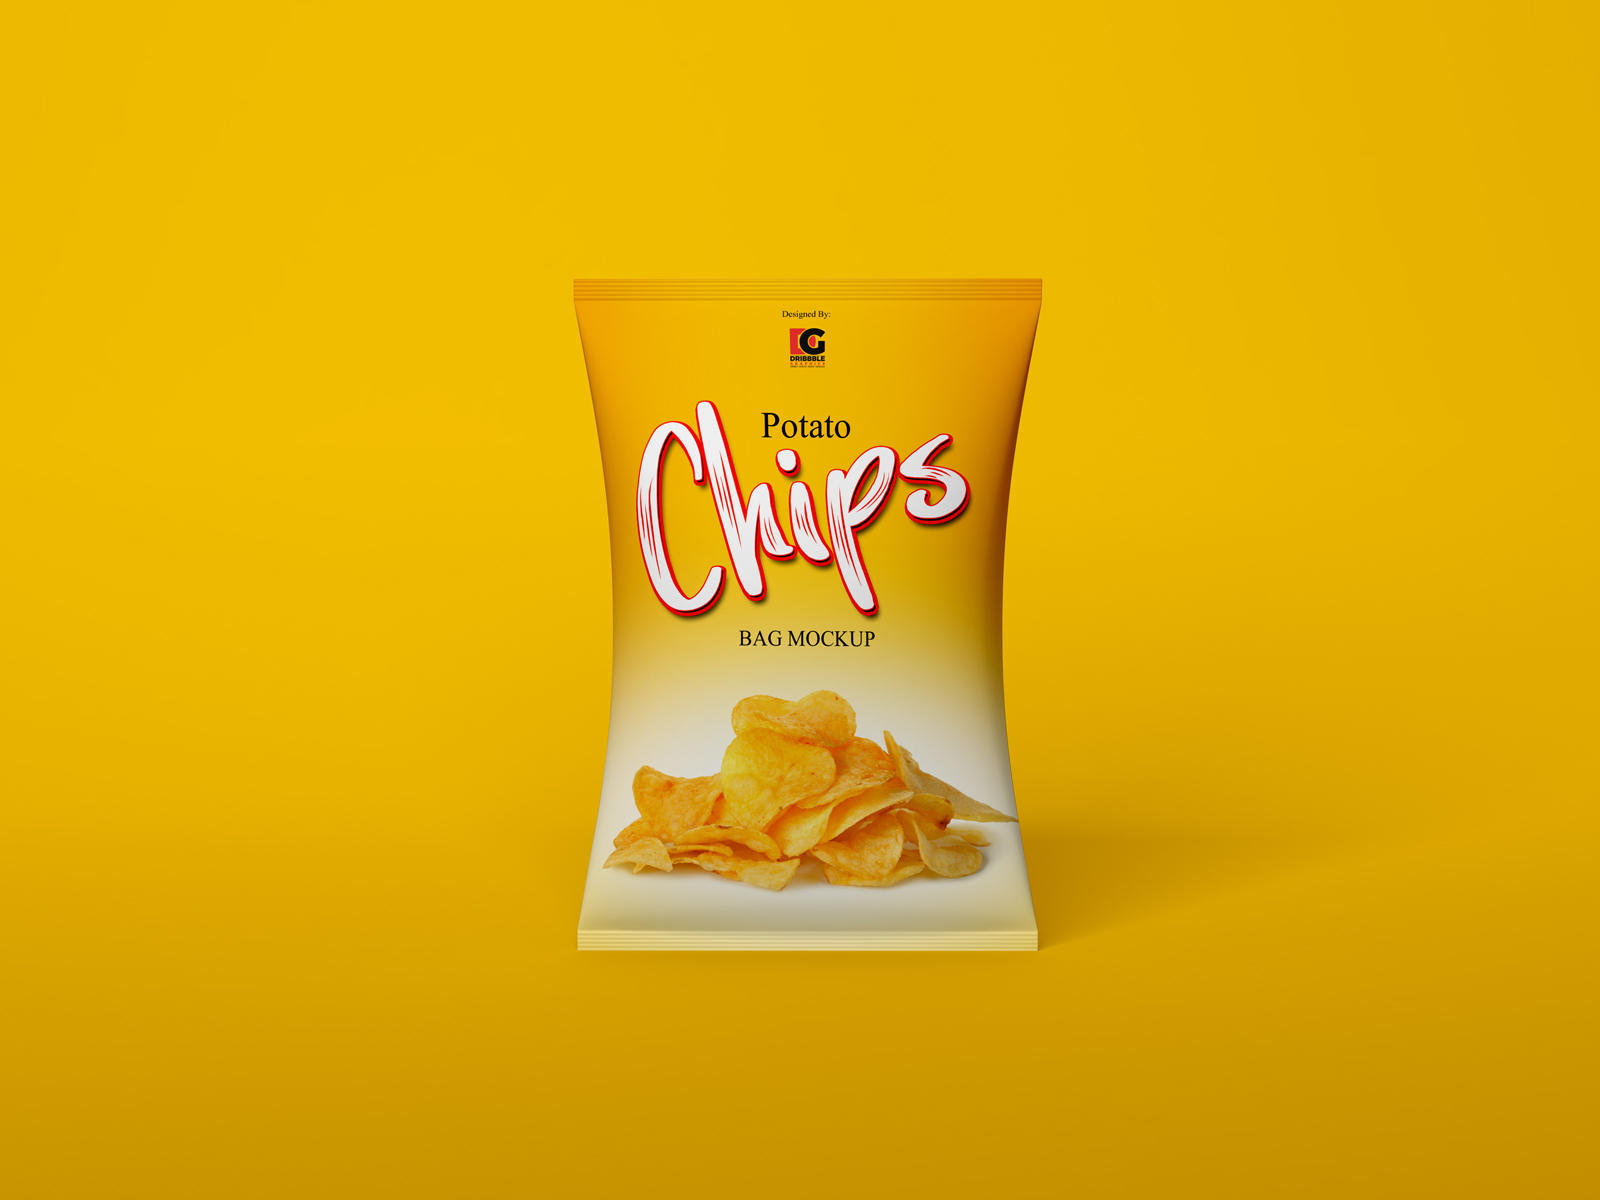 Download Free Chips Bag Mockup PSD Vol: 1 by Jessica Elle on Dribbble